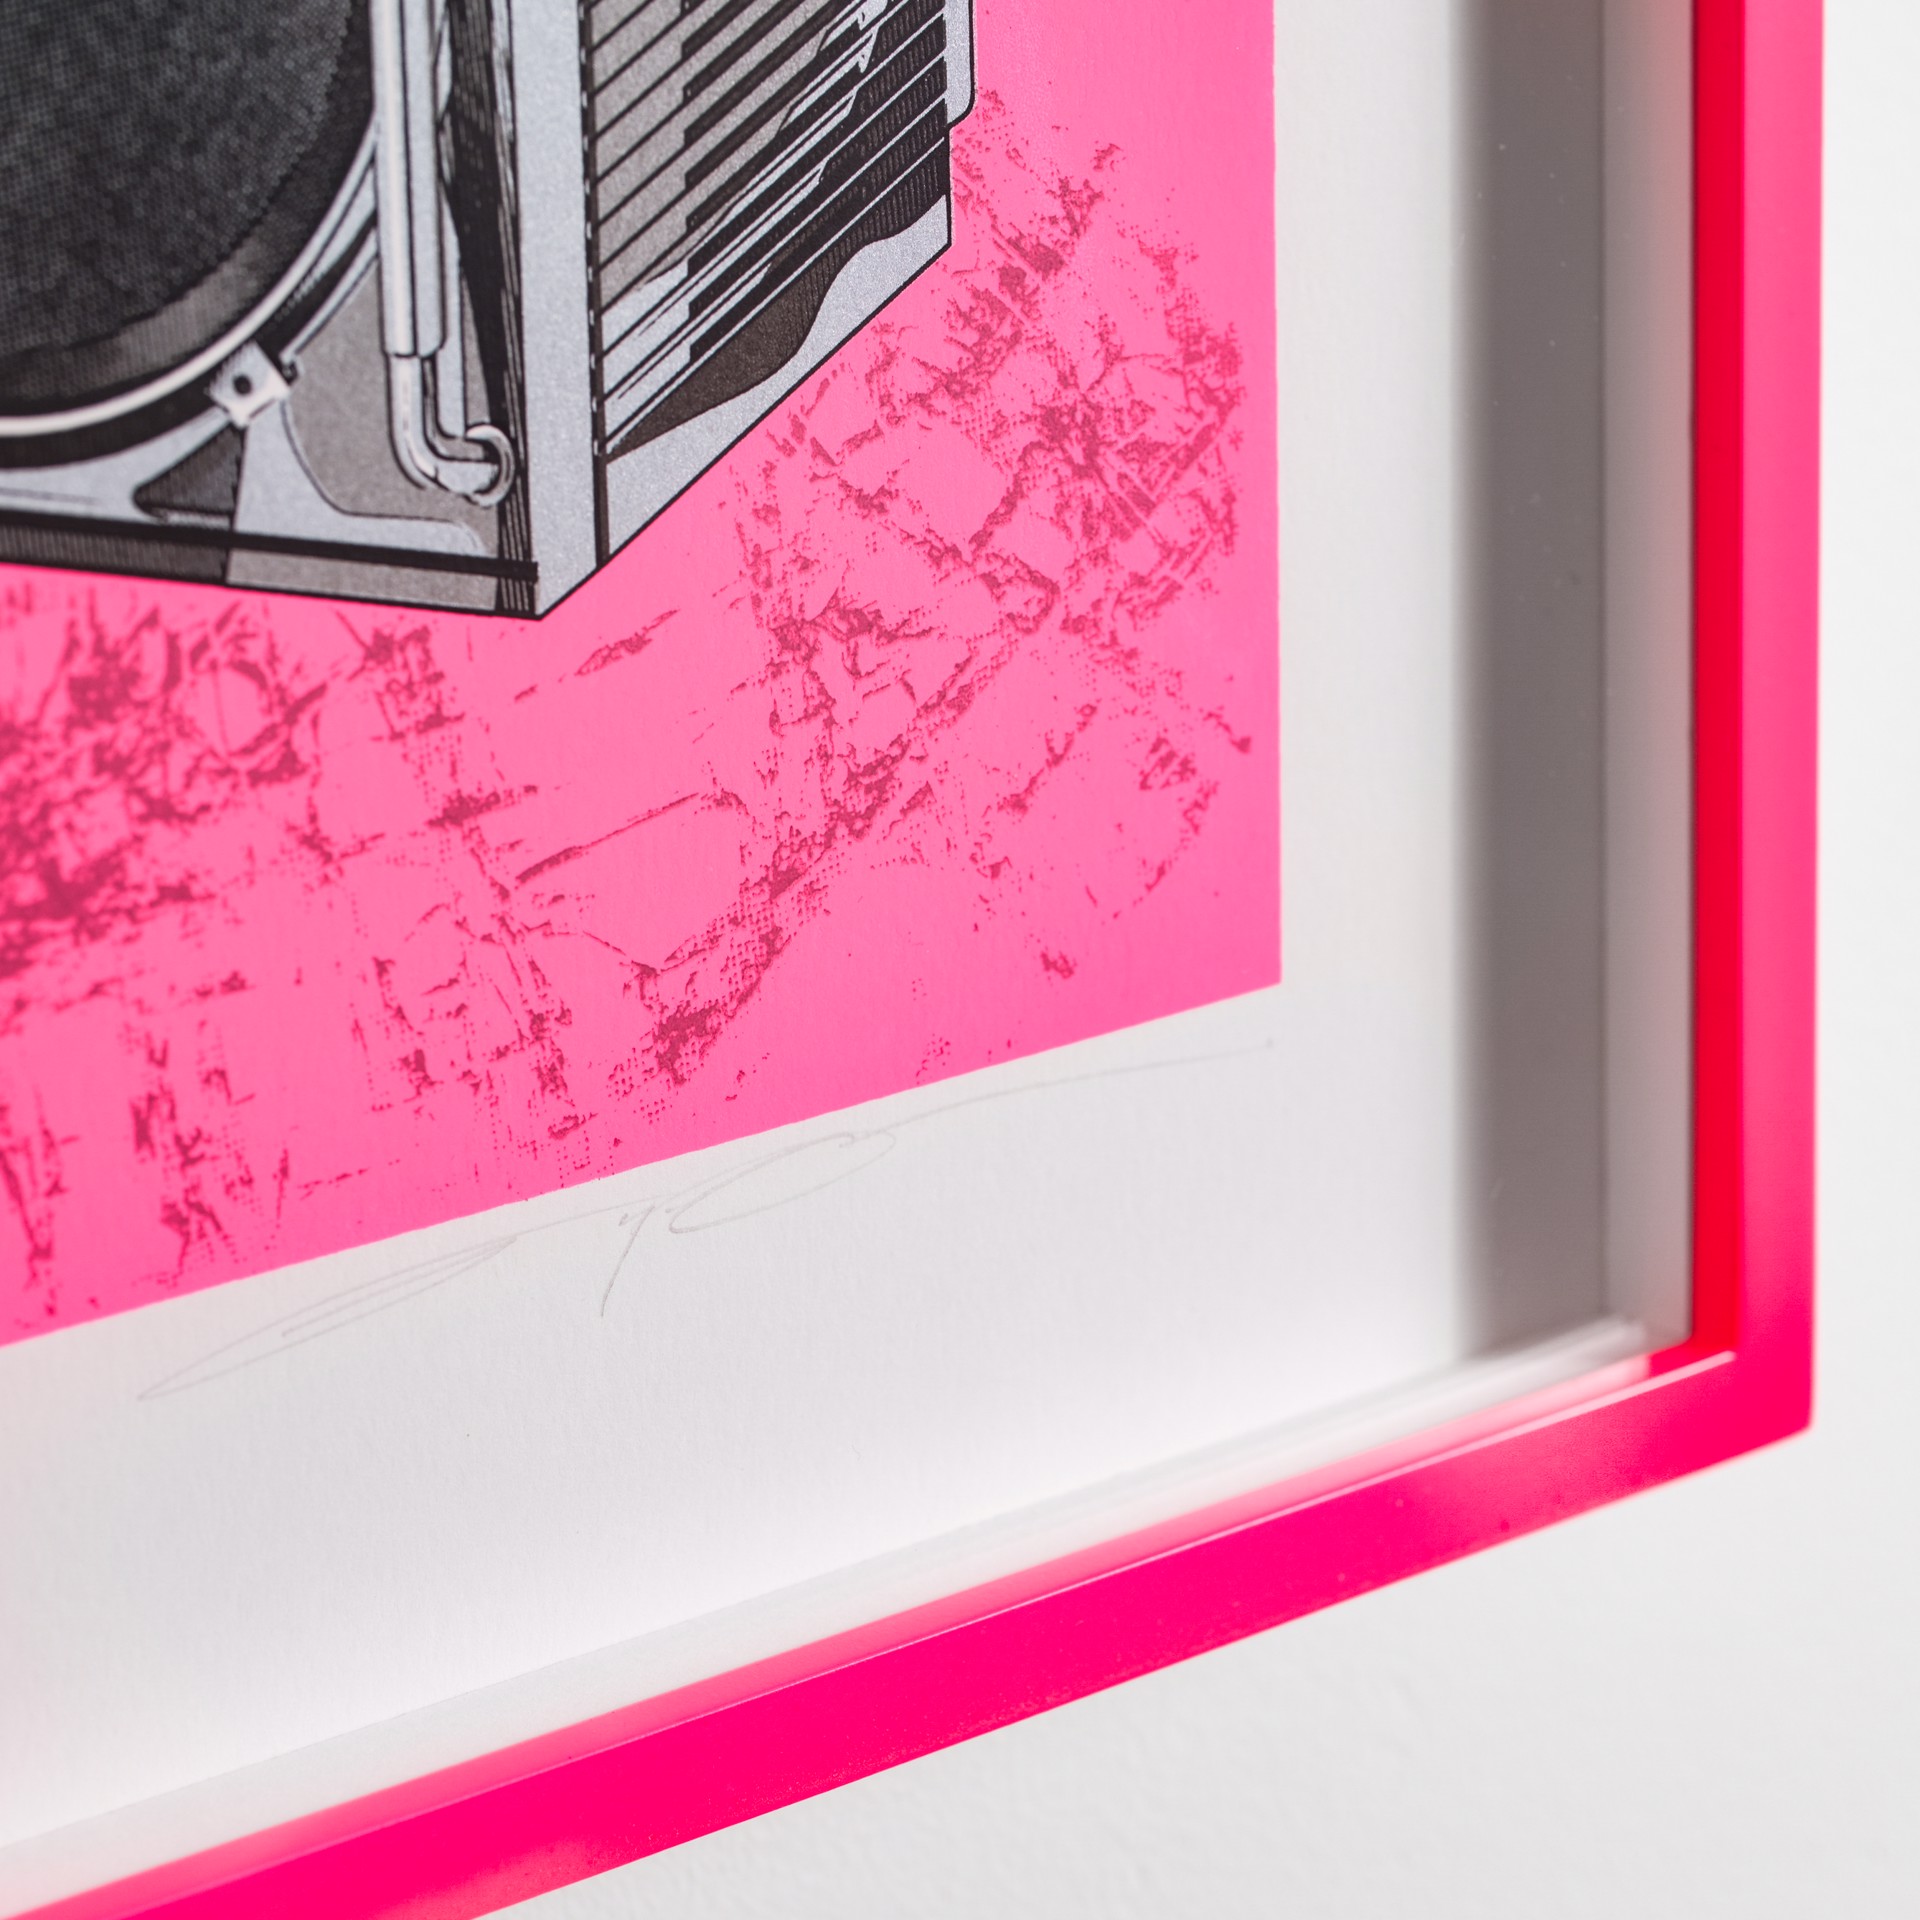 Hot Pink Silkscreen Boombox by Lyle Owerko | Boomboxes